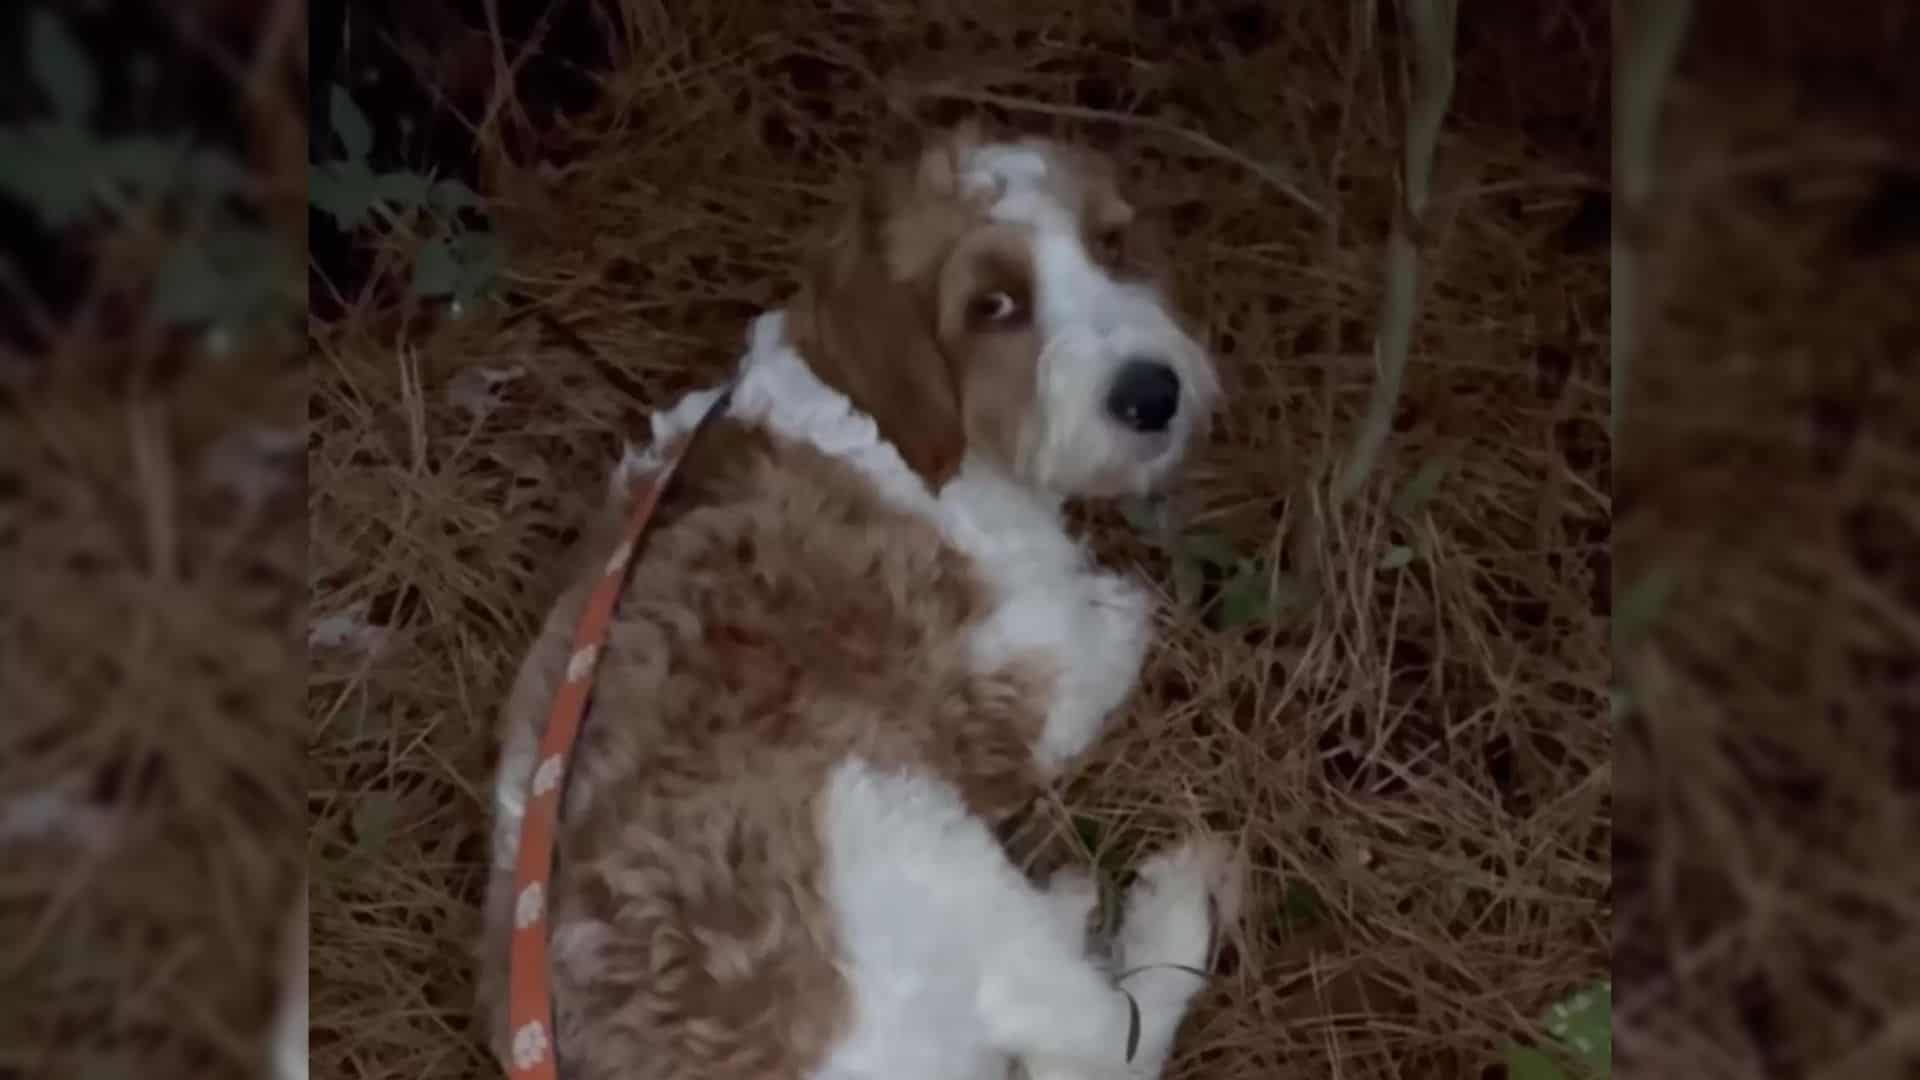 Pup That Used To Sleep On Pine Needles Finally Allows Hoomans To Rescue Him